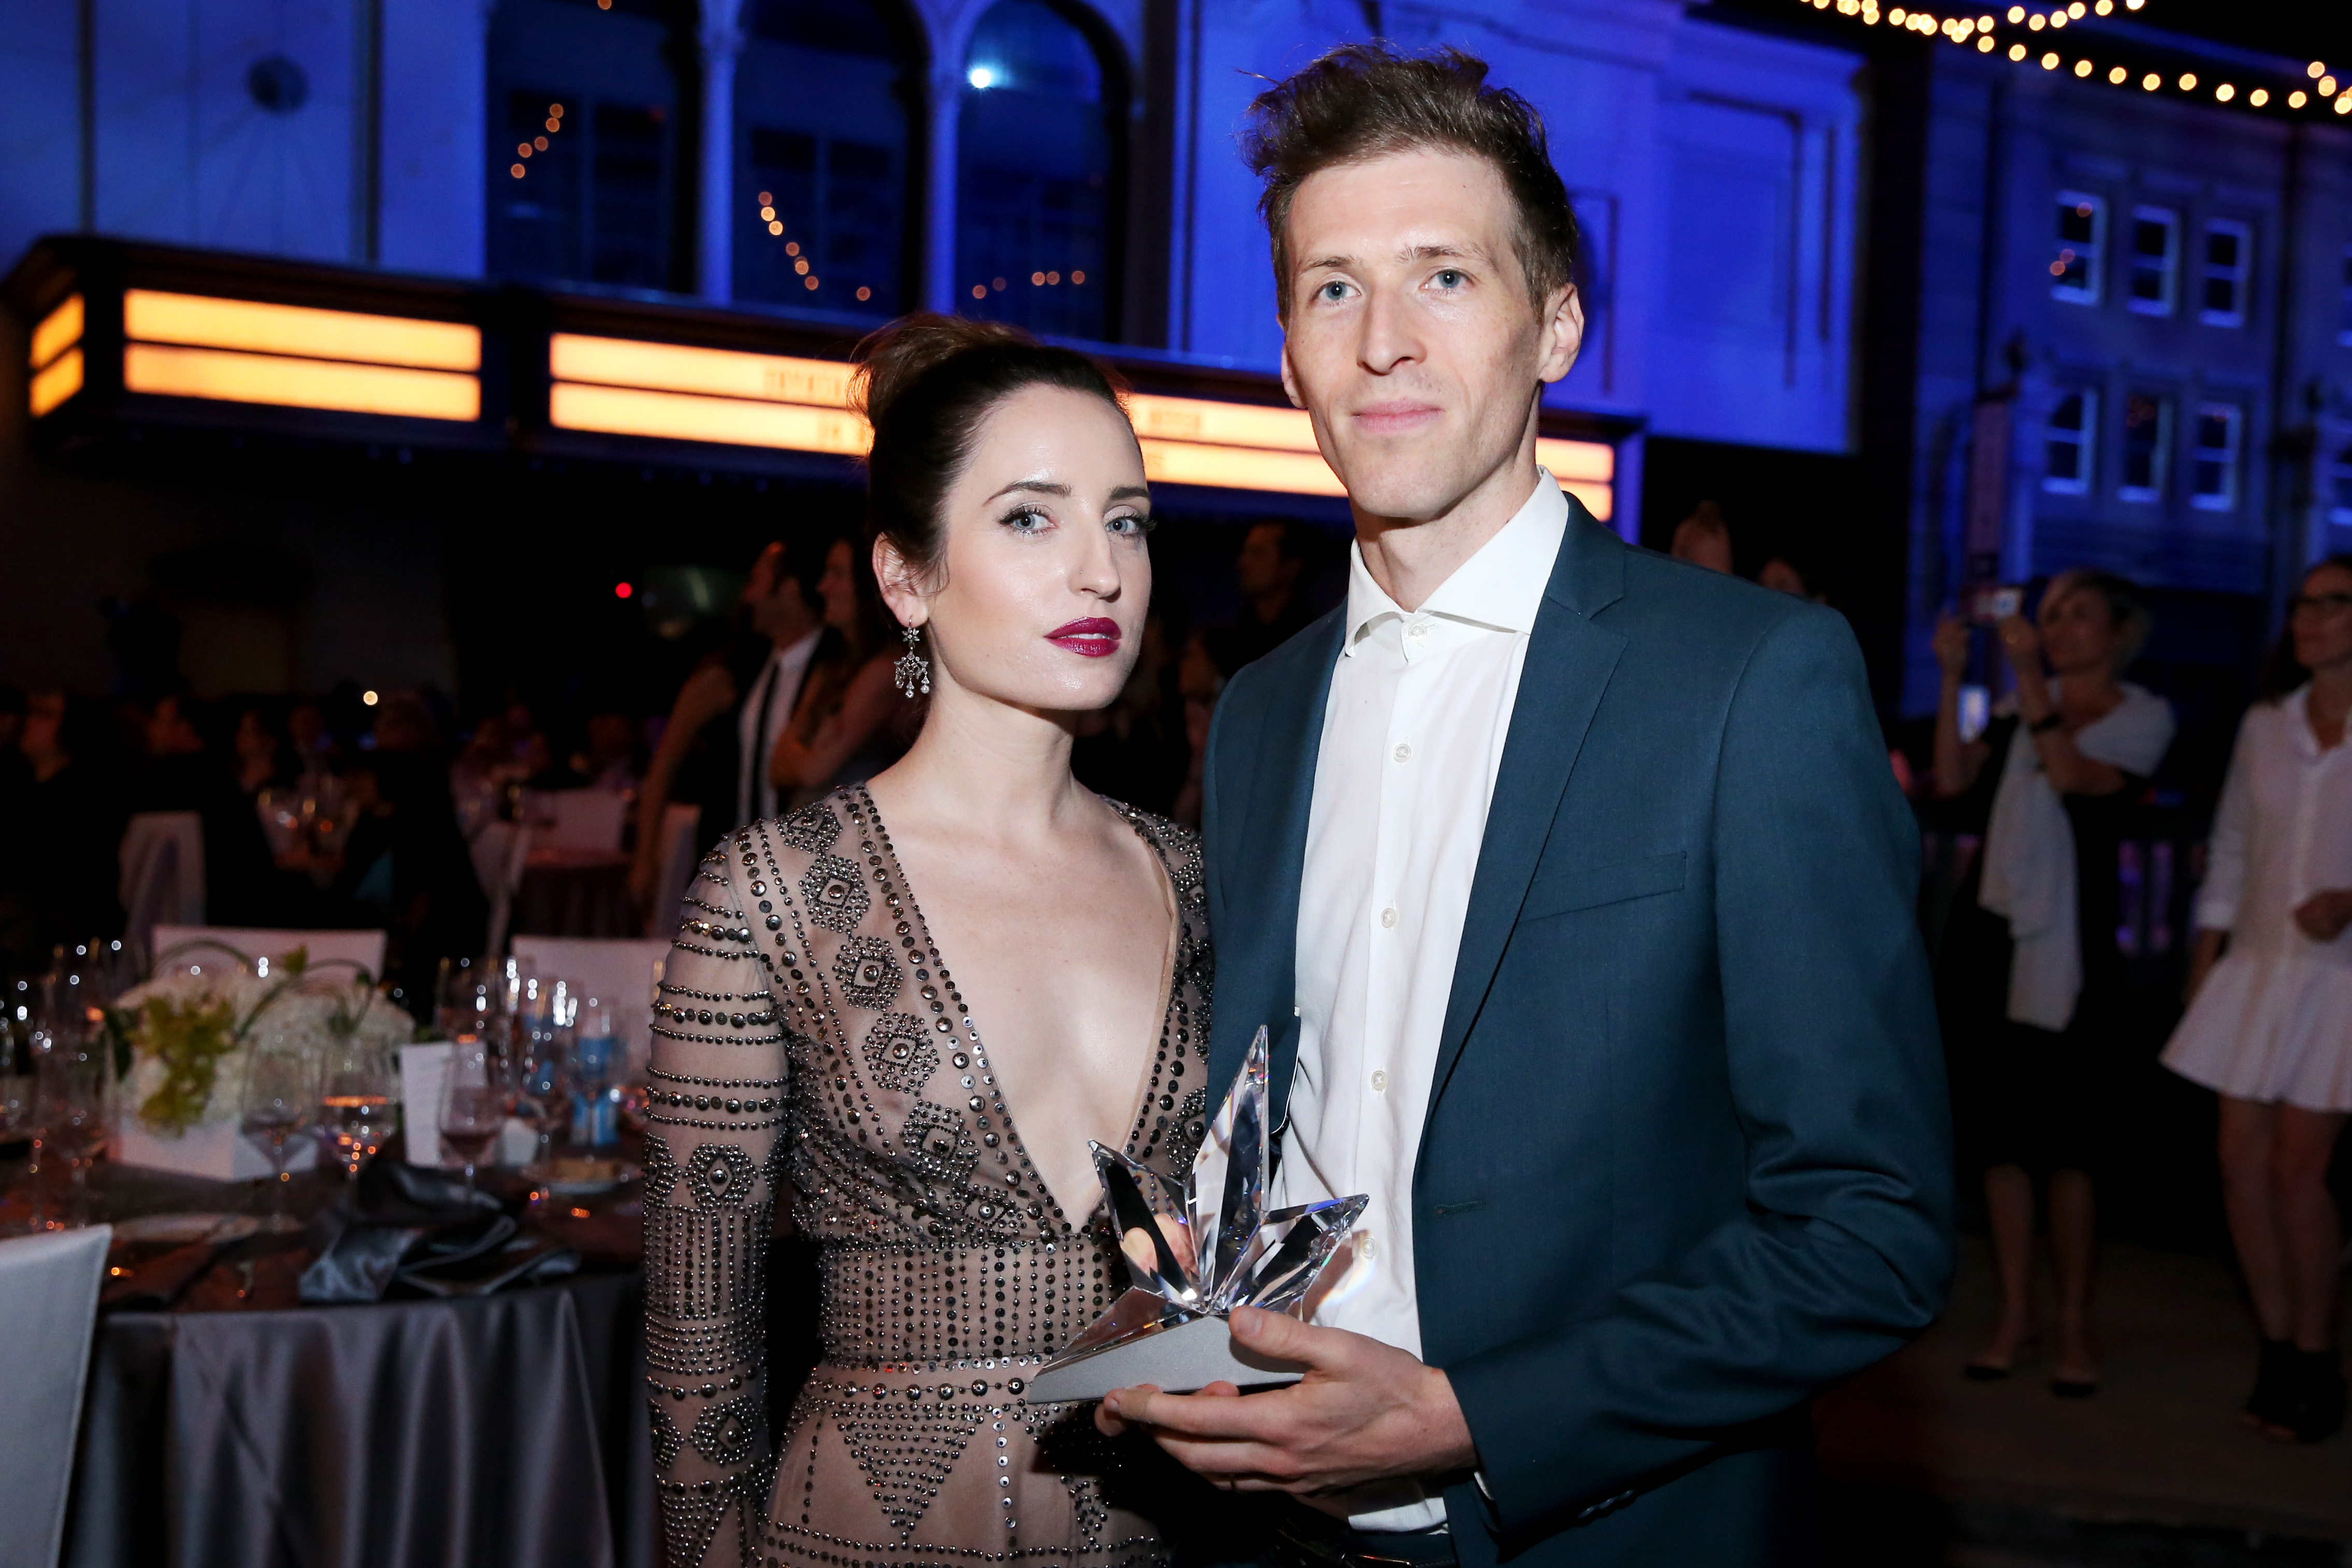 Zoe Lister-Jones and Daryl Wein at the Environmental Media Association's 26th Annual EMA Awards on October 22, 2016, in California | Source: Getty Images